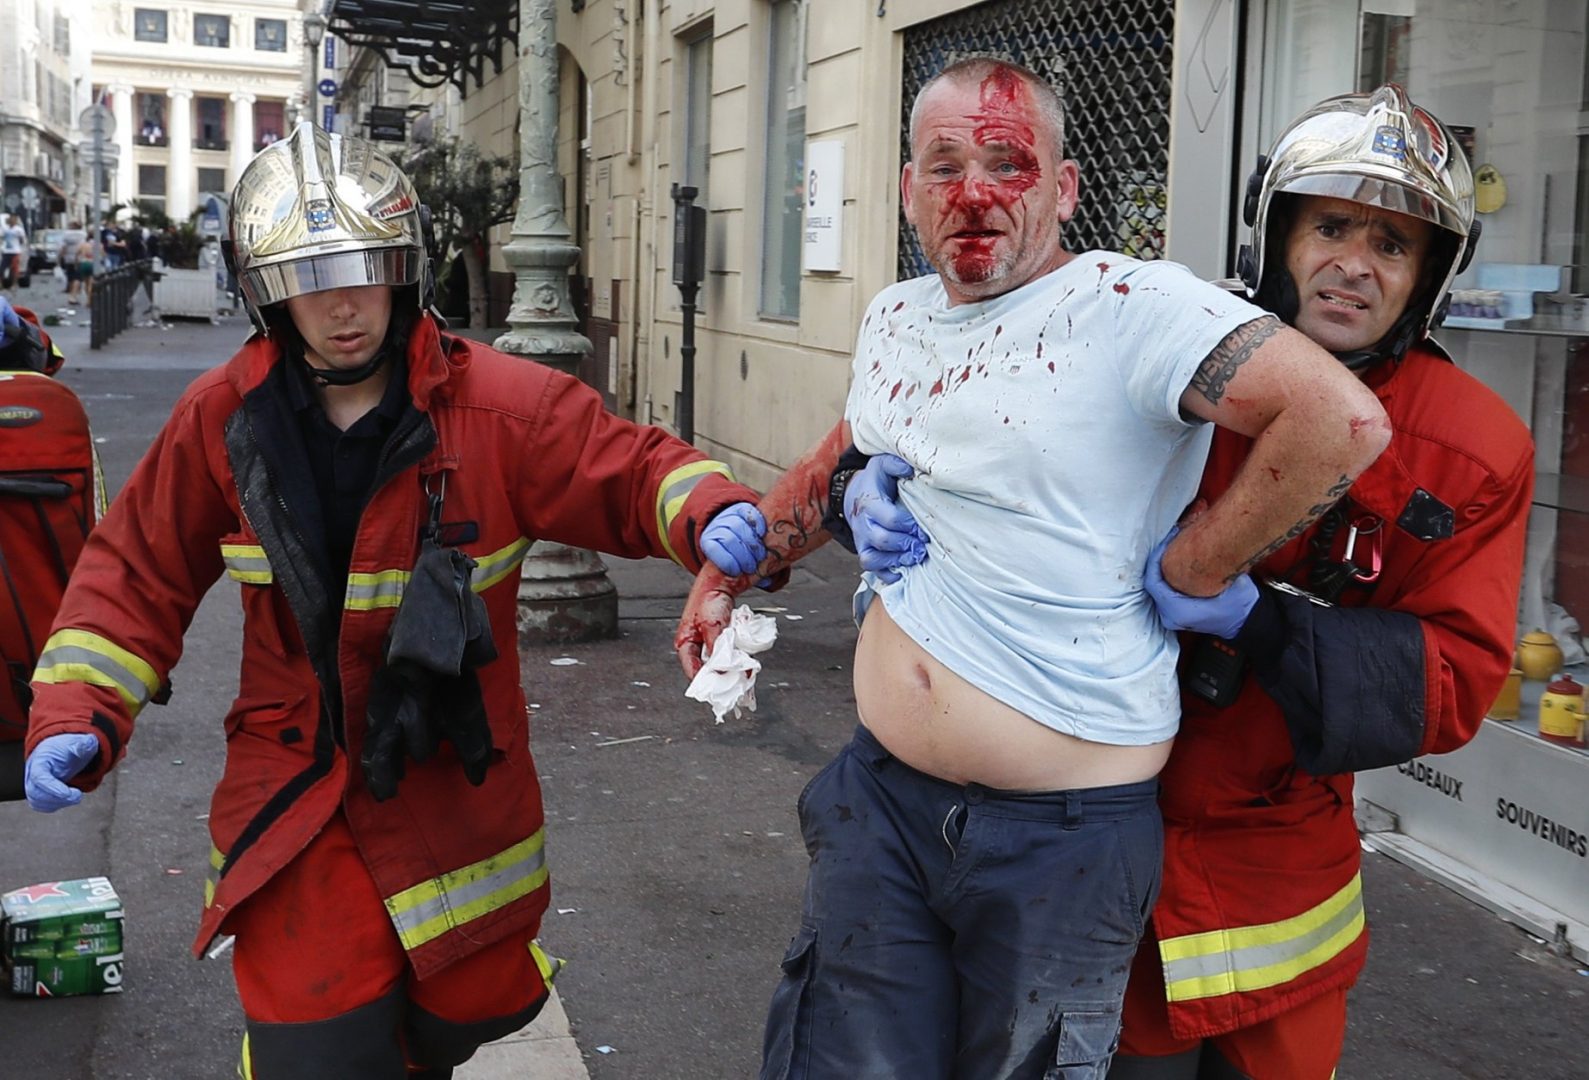 A man is taken away by emergency service workers after he was injured in clashes in downtown Marseille, France, Saturday, June 11, 2016. Riot police have thrown tear gas canisters at soccer fans Saturday in Marseille's Old Port in a third straight day of violence in the city.  (AP Photo/Darko Bandic)